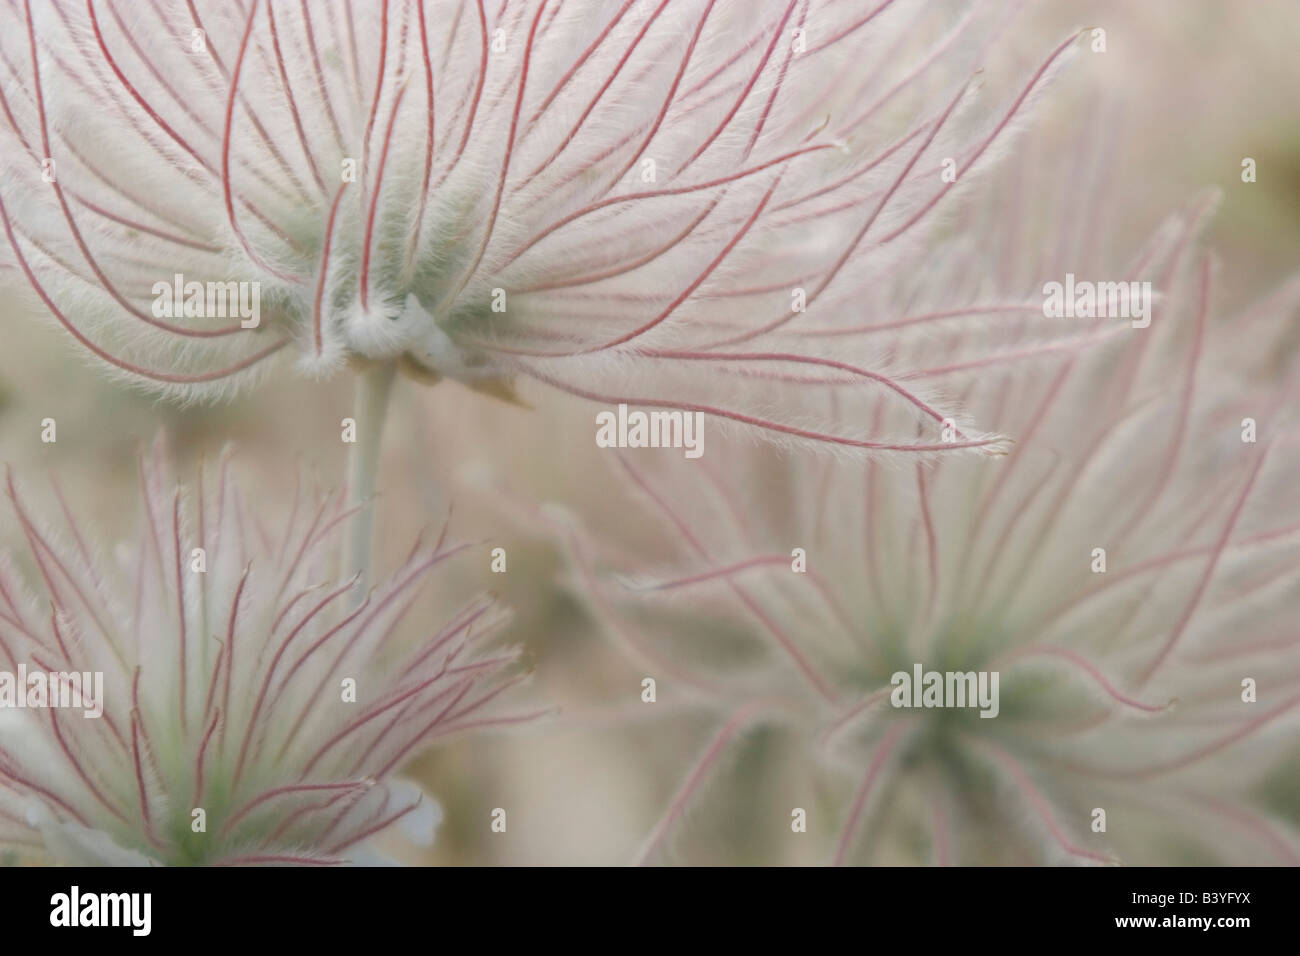 USA, Nevada, Las Vegas, Red Rock State Park. A close-up view of Apache plume flowers. Stock Photo